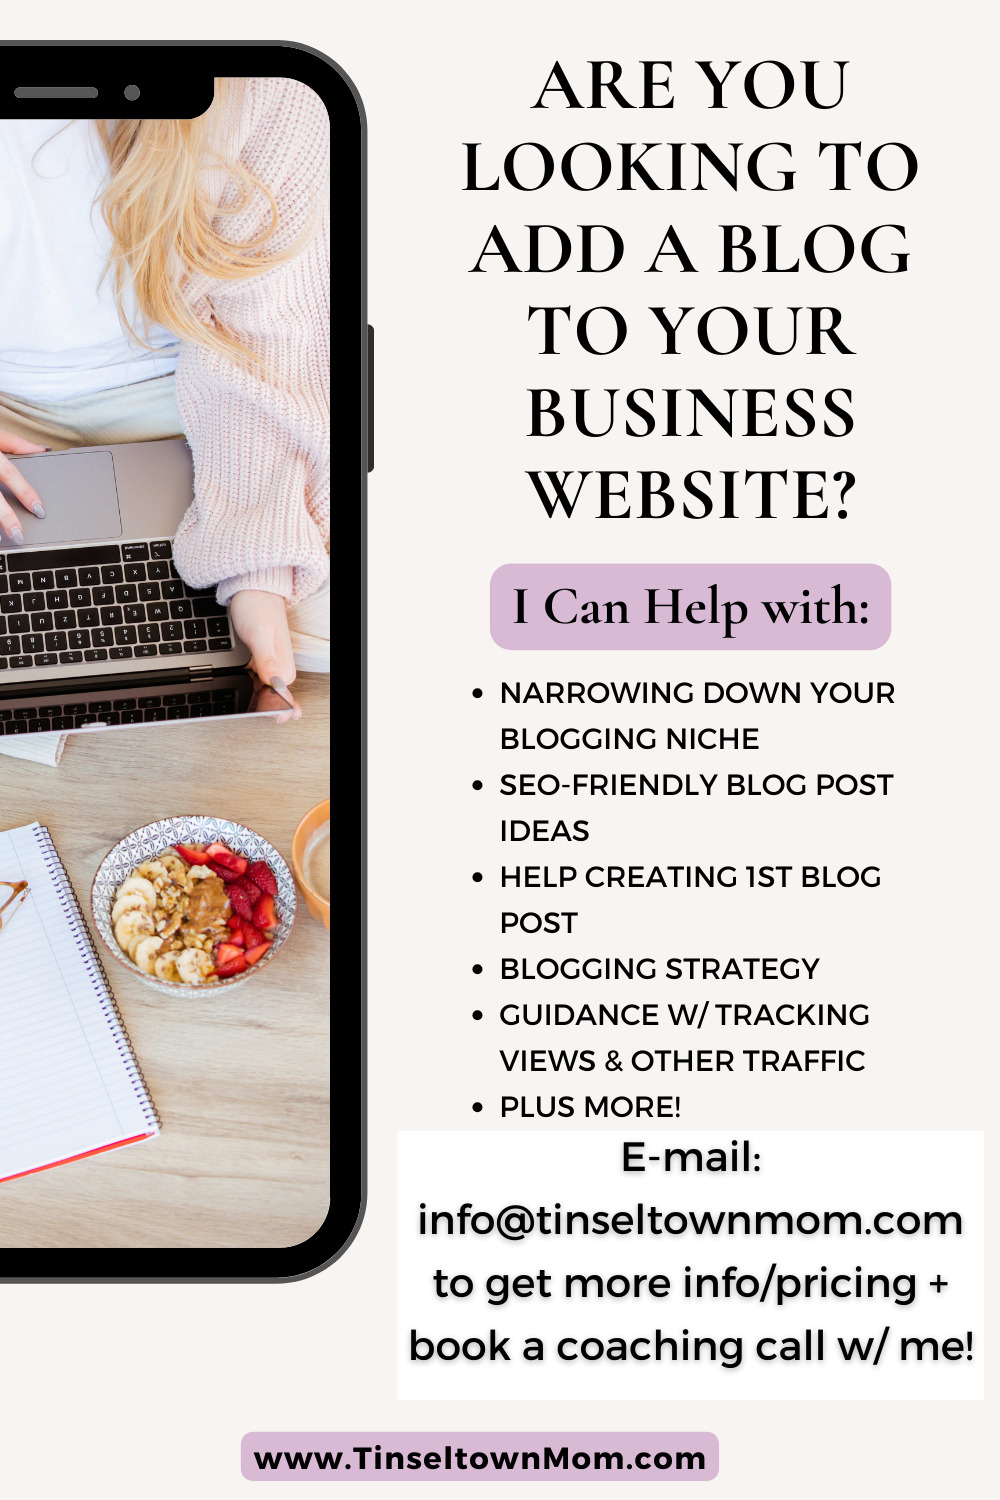 Add a Blog to Your Business Website! Book A Coaching Call with Me to Assist